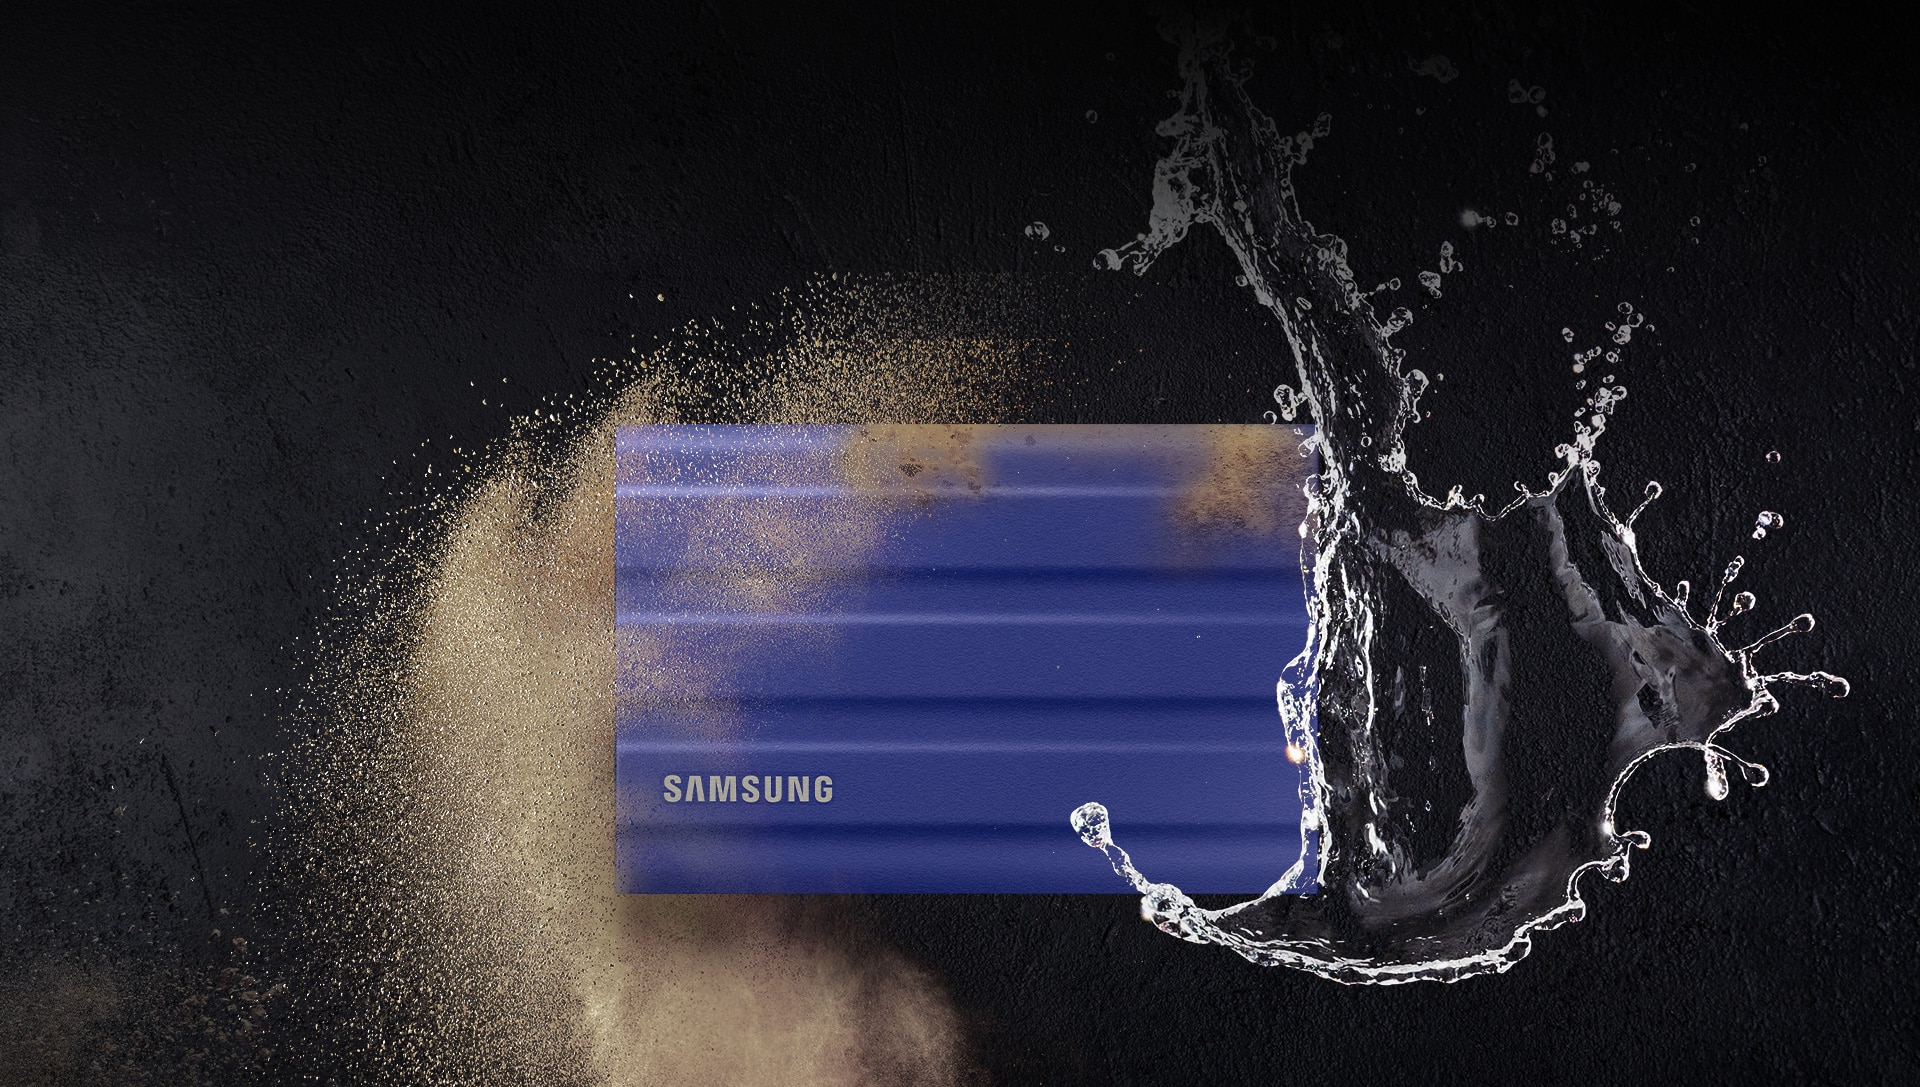 samsung T7 shield: drop, water & dust-resistant portable SSD